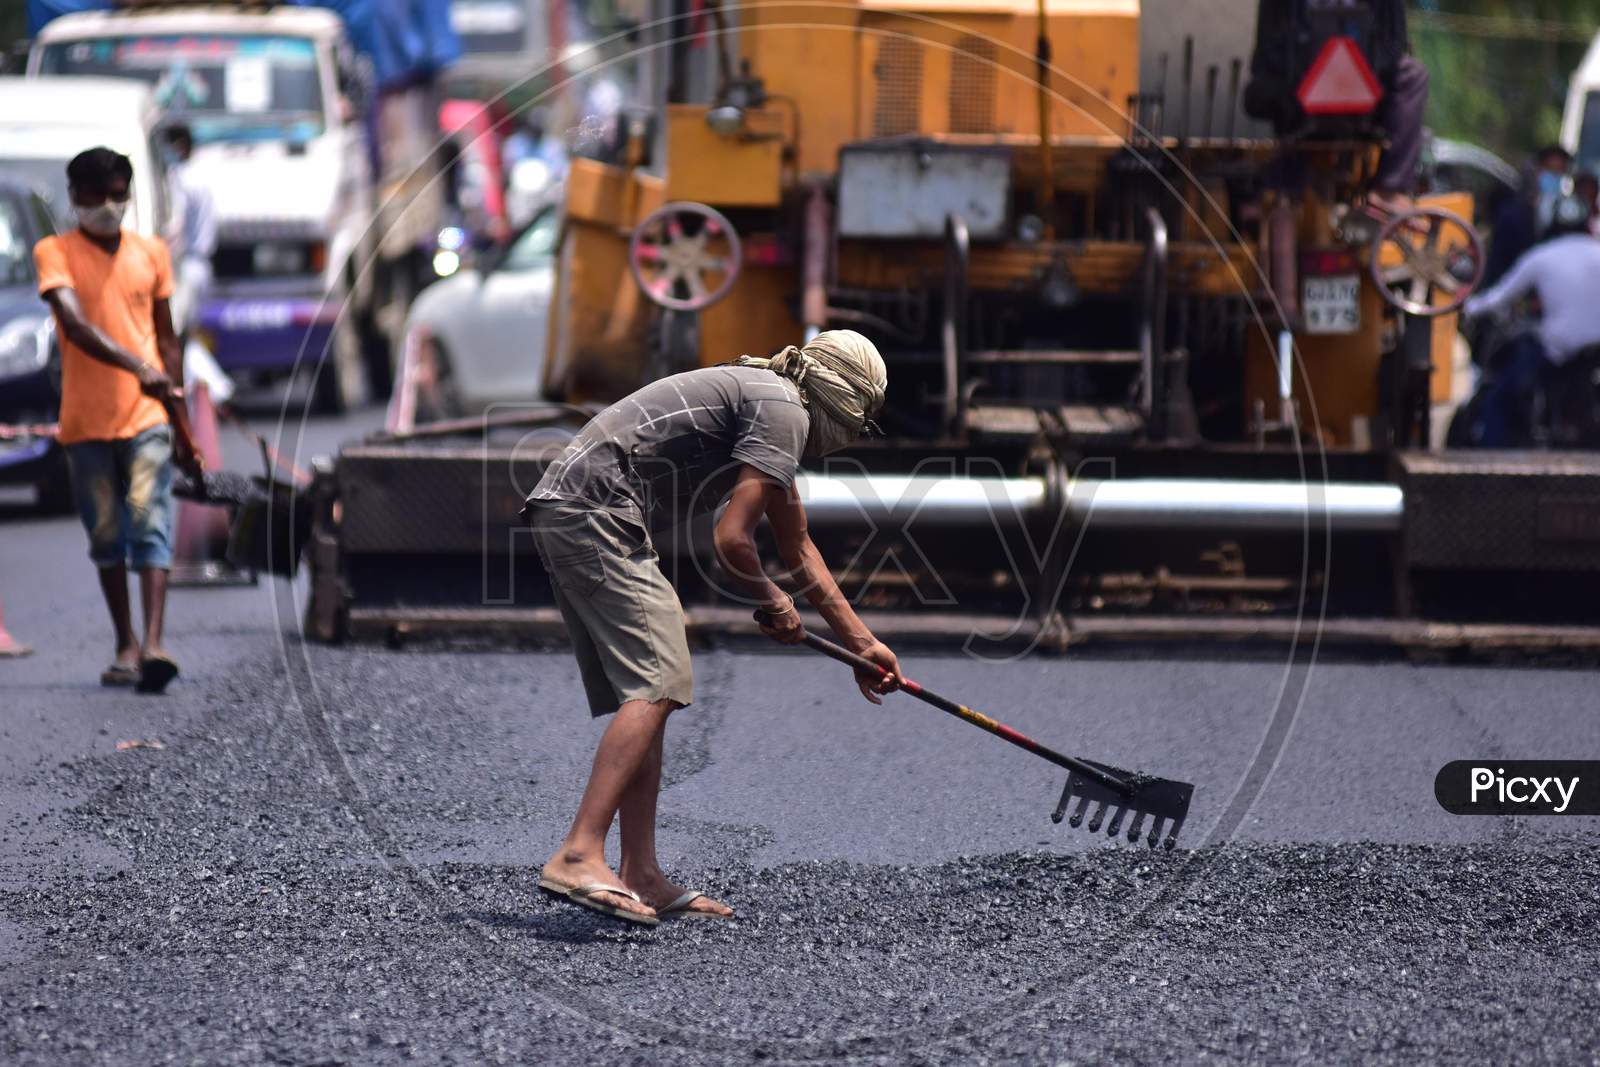 Labourers Work On A Road Construction After Authorities Eased Restrictions, During Nationwide Lockdown Amidst Coronavirus Or COVID-19 Pandemic In Nagaon District Of Assam On May 7,2020